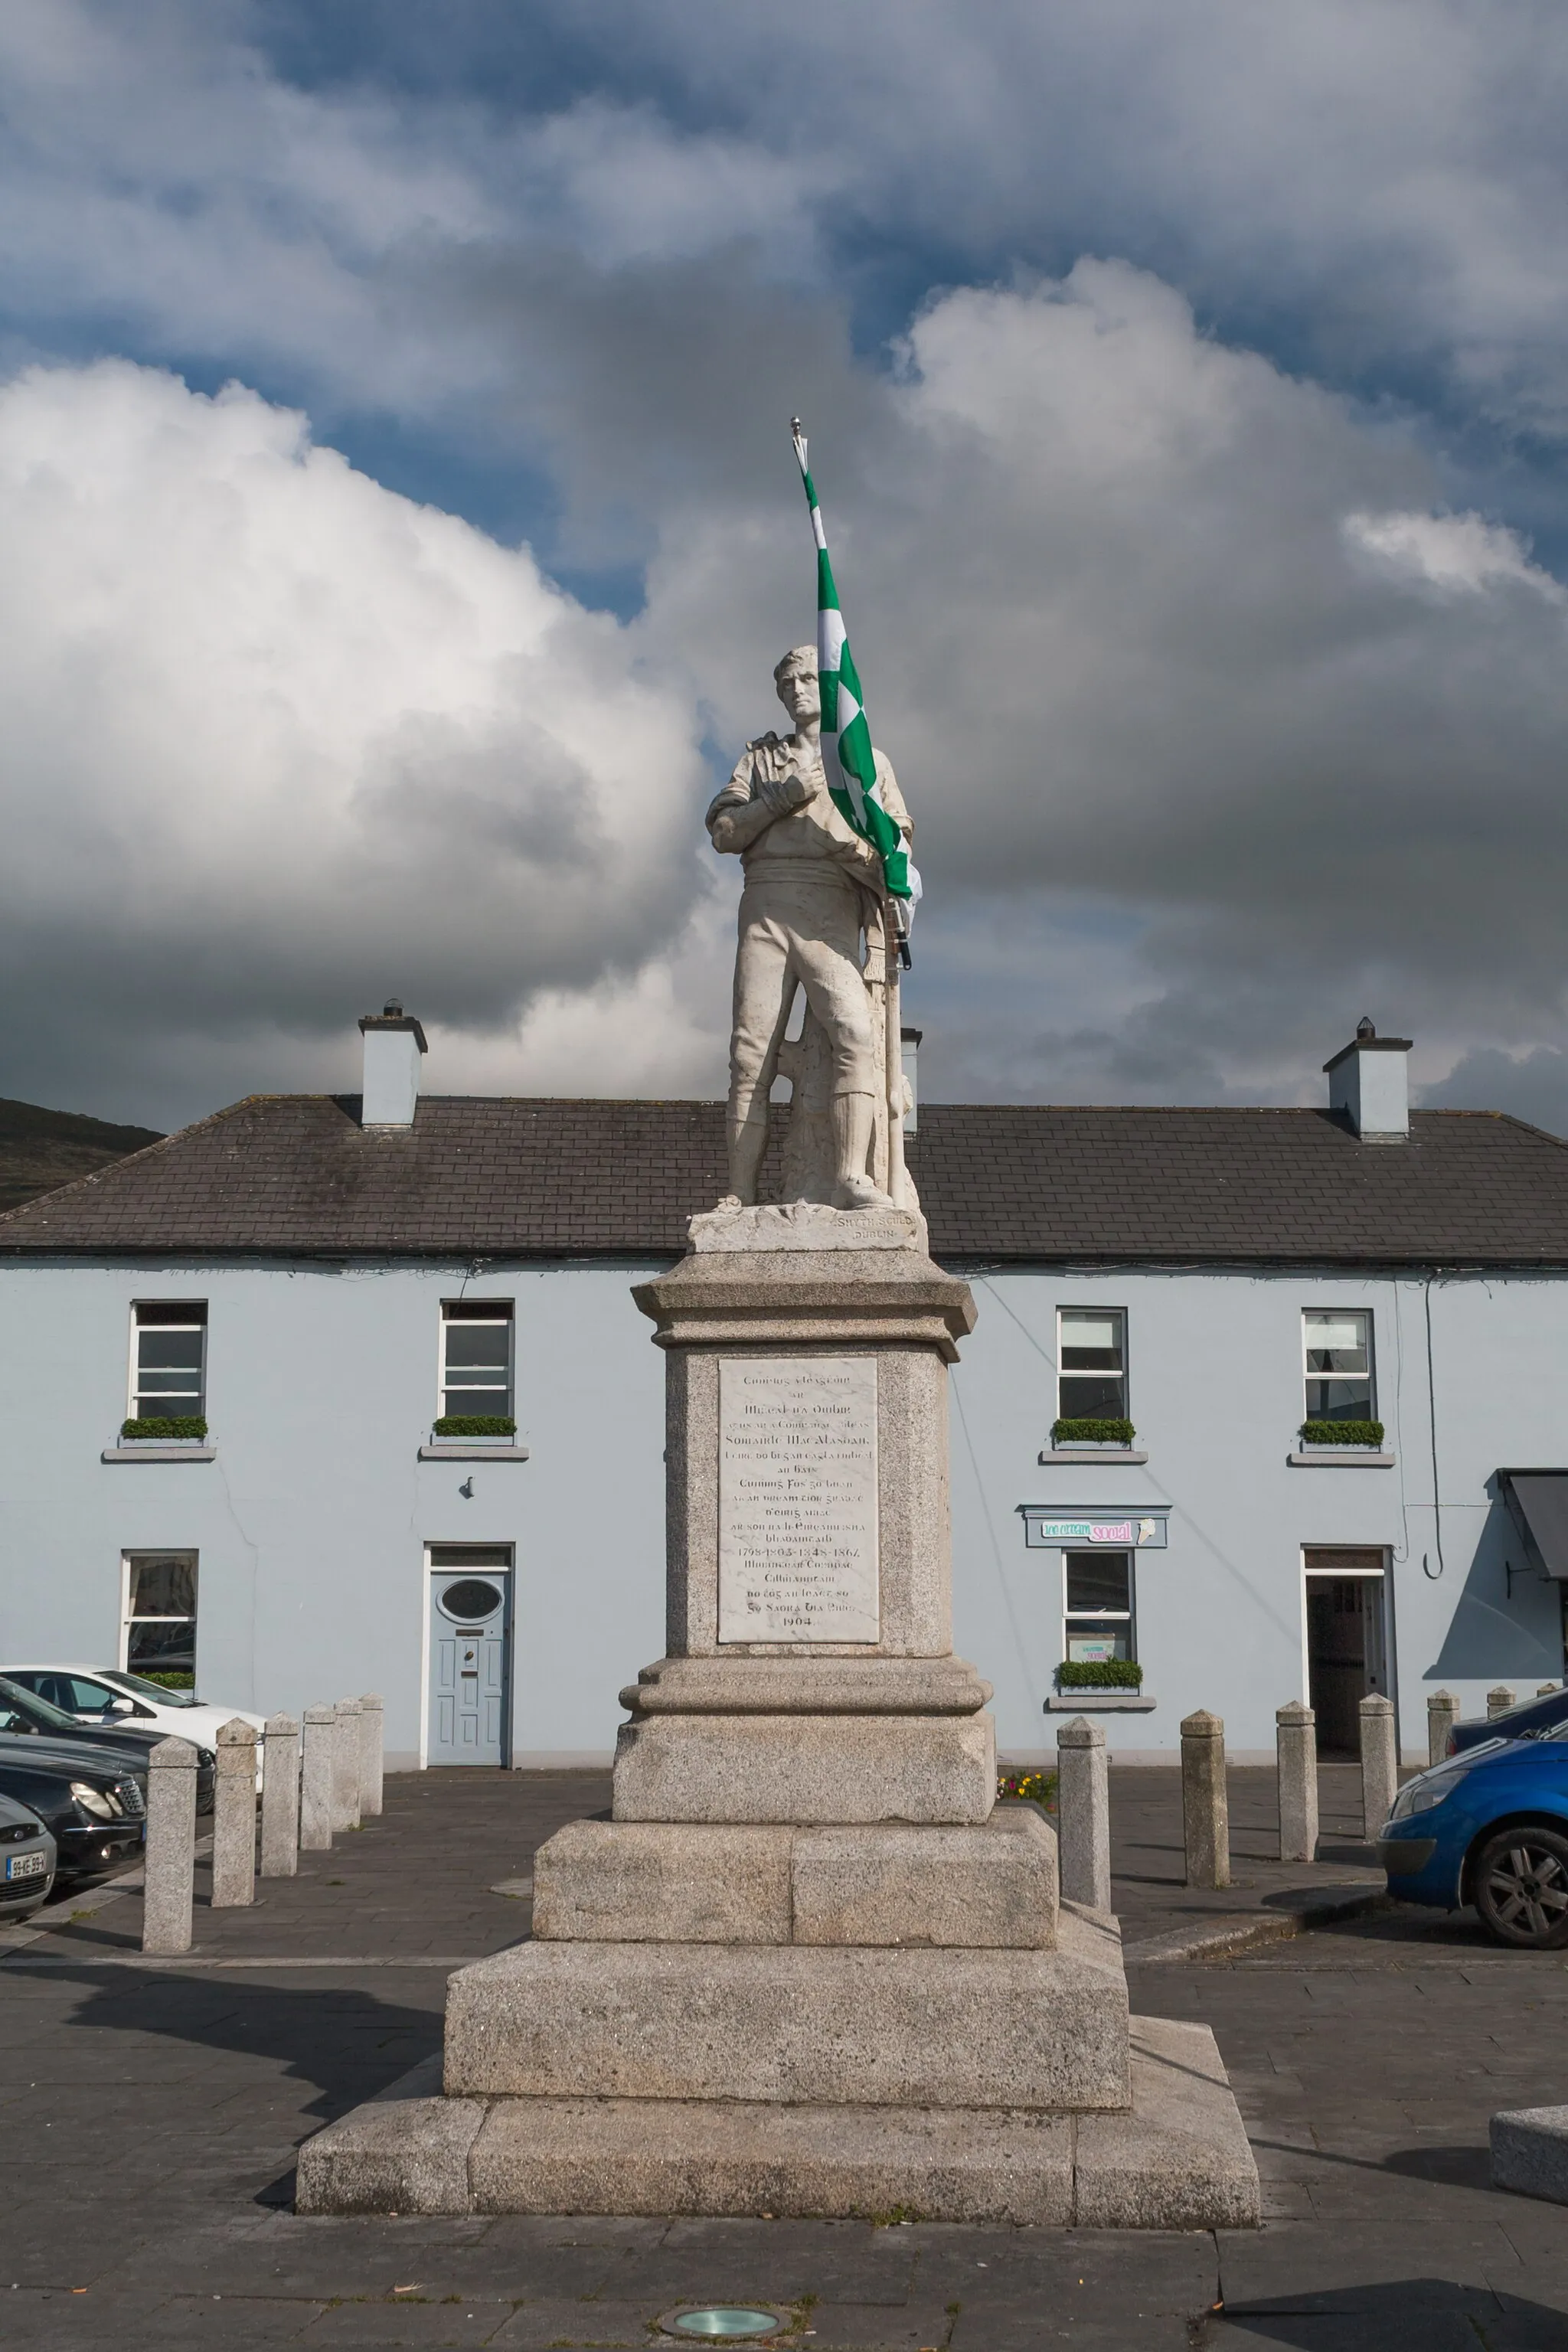 Photo showing: Monument in memory of Michael Dwyer at the Market Square of Baltinglass, sculpted by George Smyth of Dublin, grandson of John Smyth, and unveiled in 1904. (See Paula Murphy, Nineteenth-Century Irish Sculpture – Native Genius Reaffirmed, p. 243; Rita Larkin, Smyth, John (1776–l840), in: Sculpture 1600–2000 (Art and Architecture of Ireland, Volume III), p. 325; DIA record.) The statue is equipped with the colors of the Baltinglass GAA club.